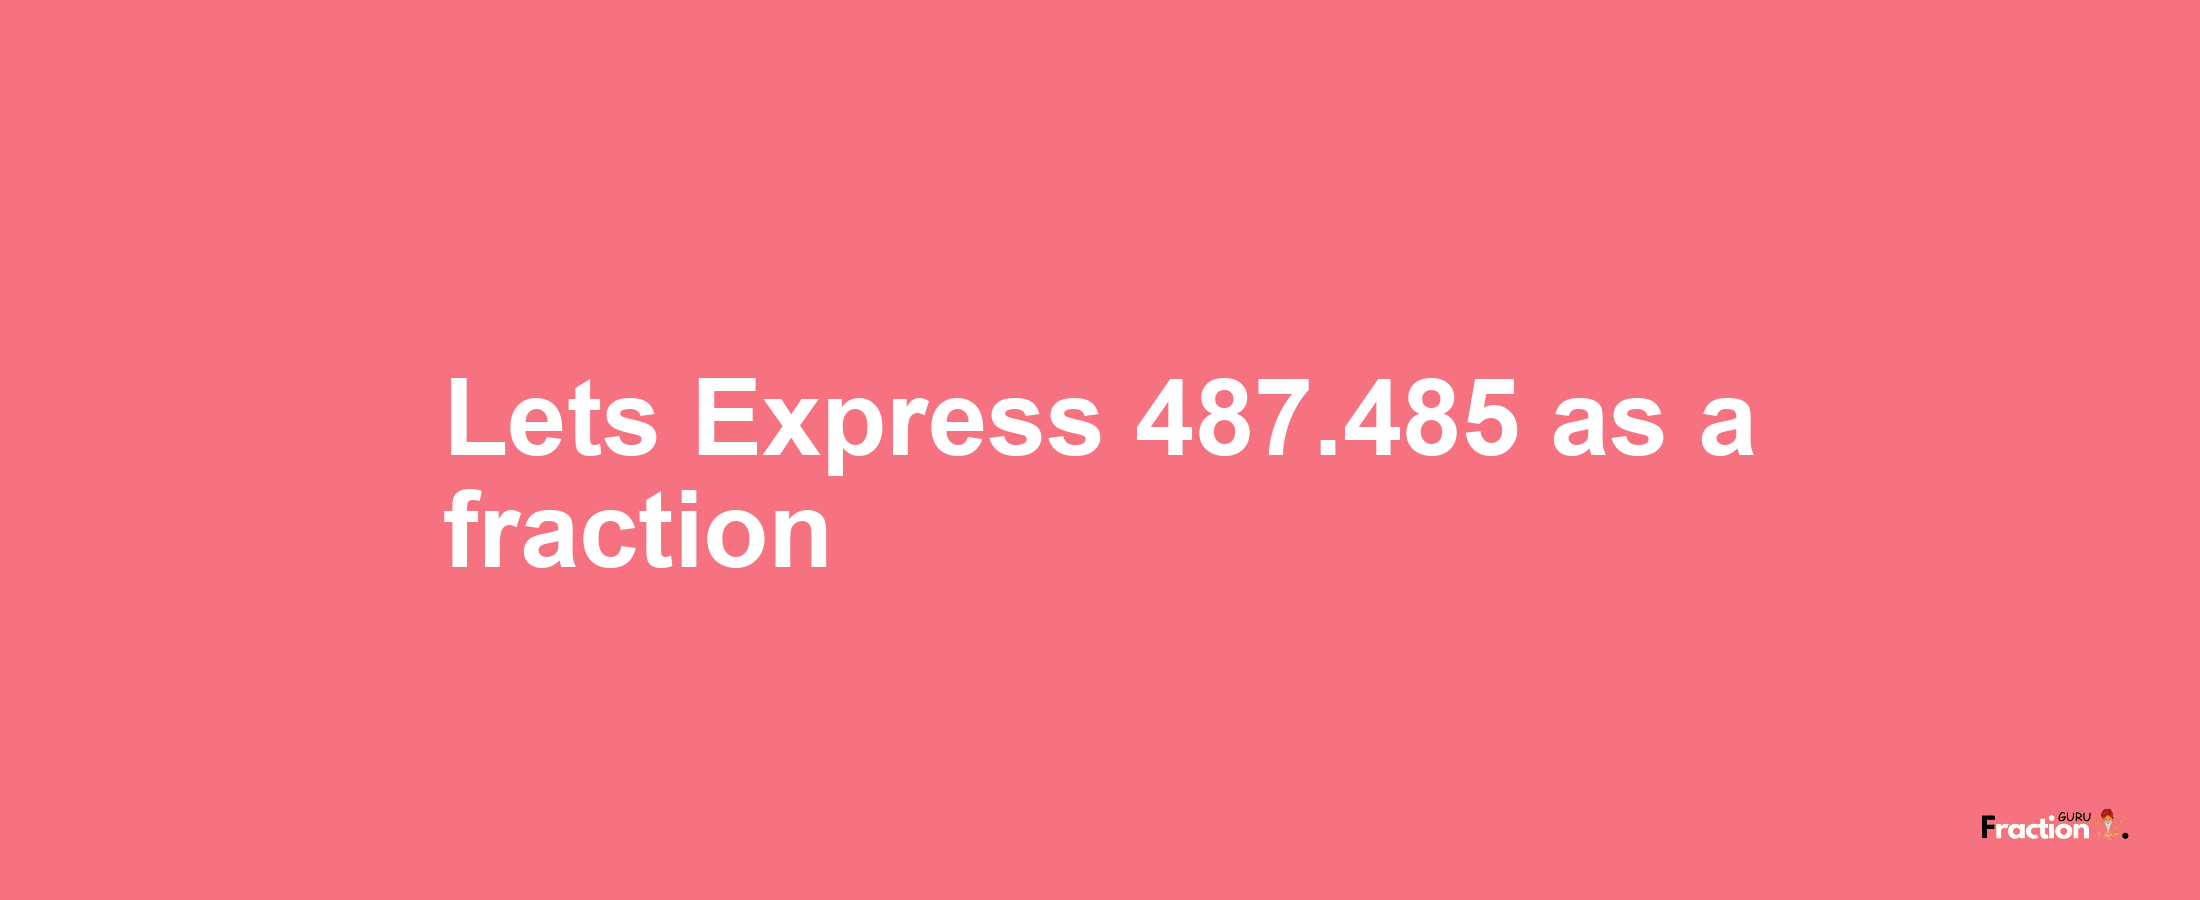 Lets Express 487.485 as afraction